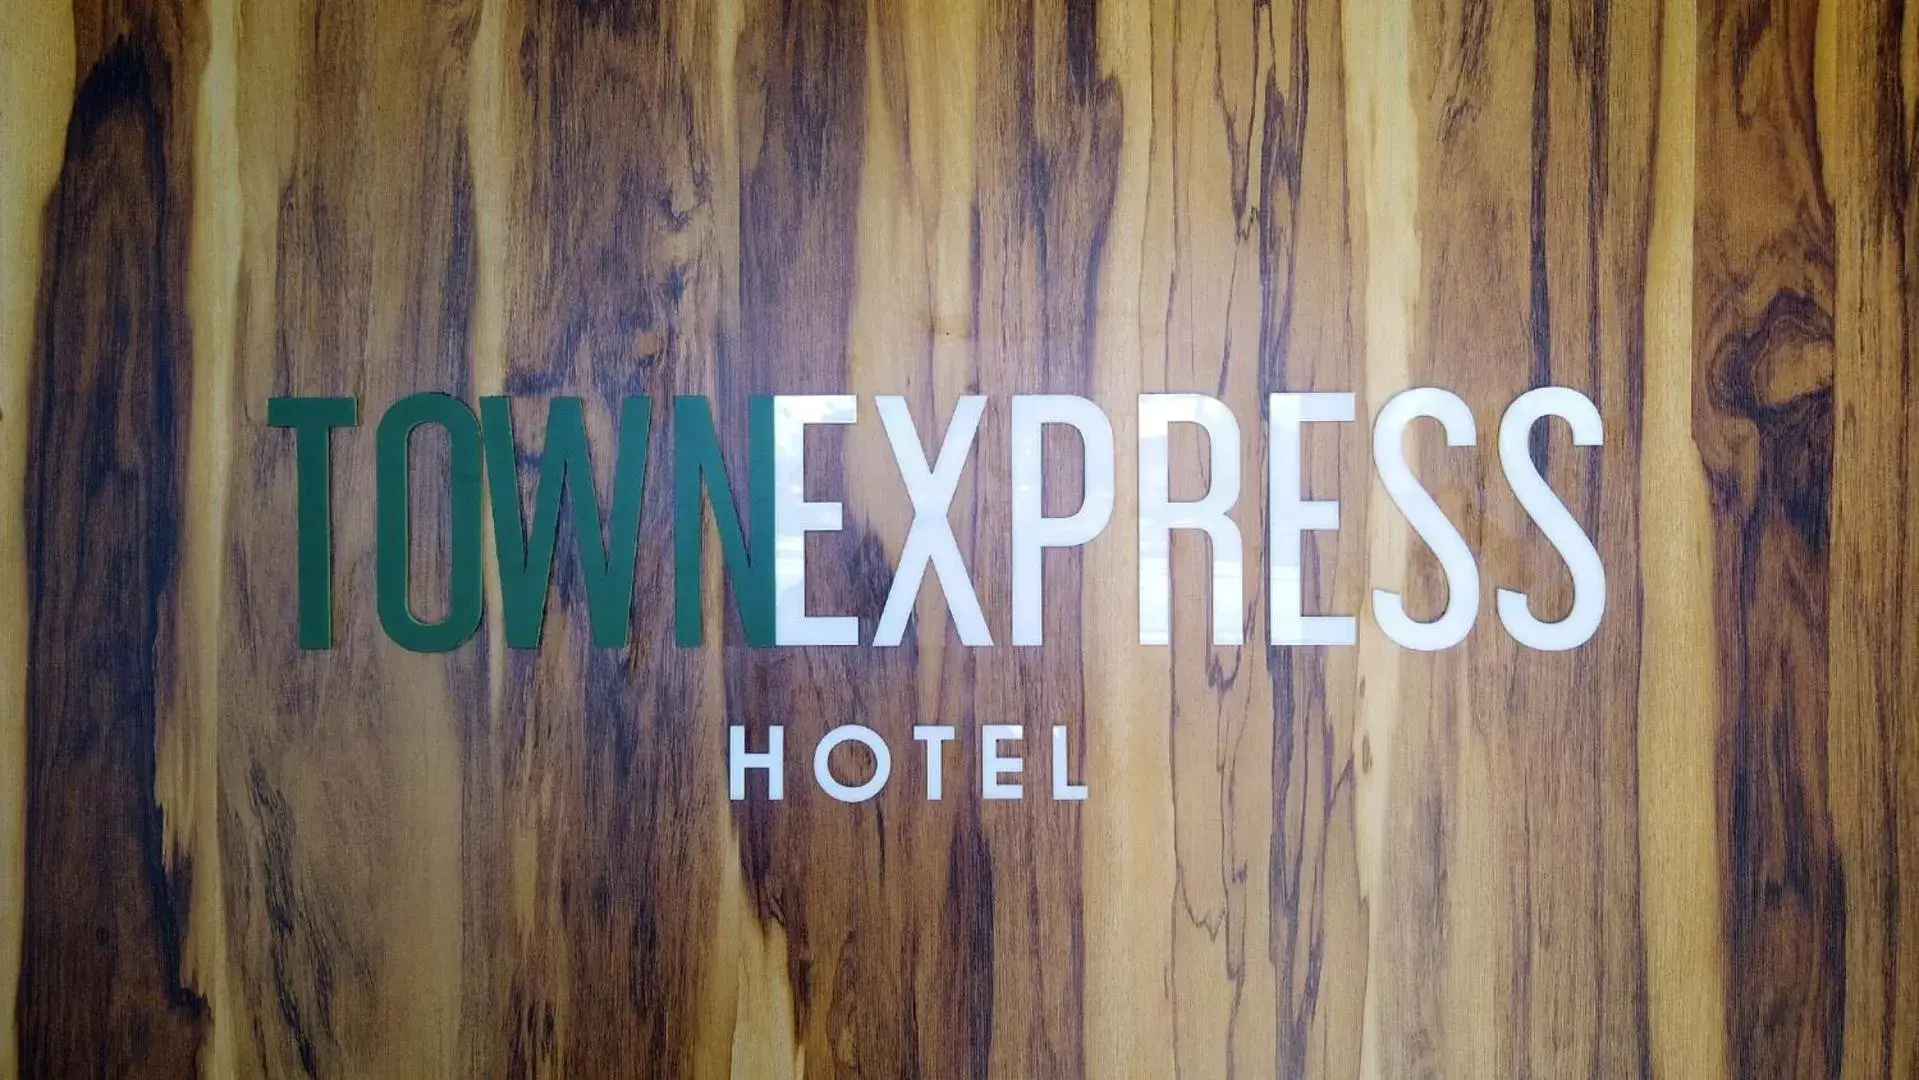 Property logo or sign in Hotel Town Express